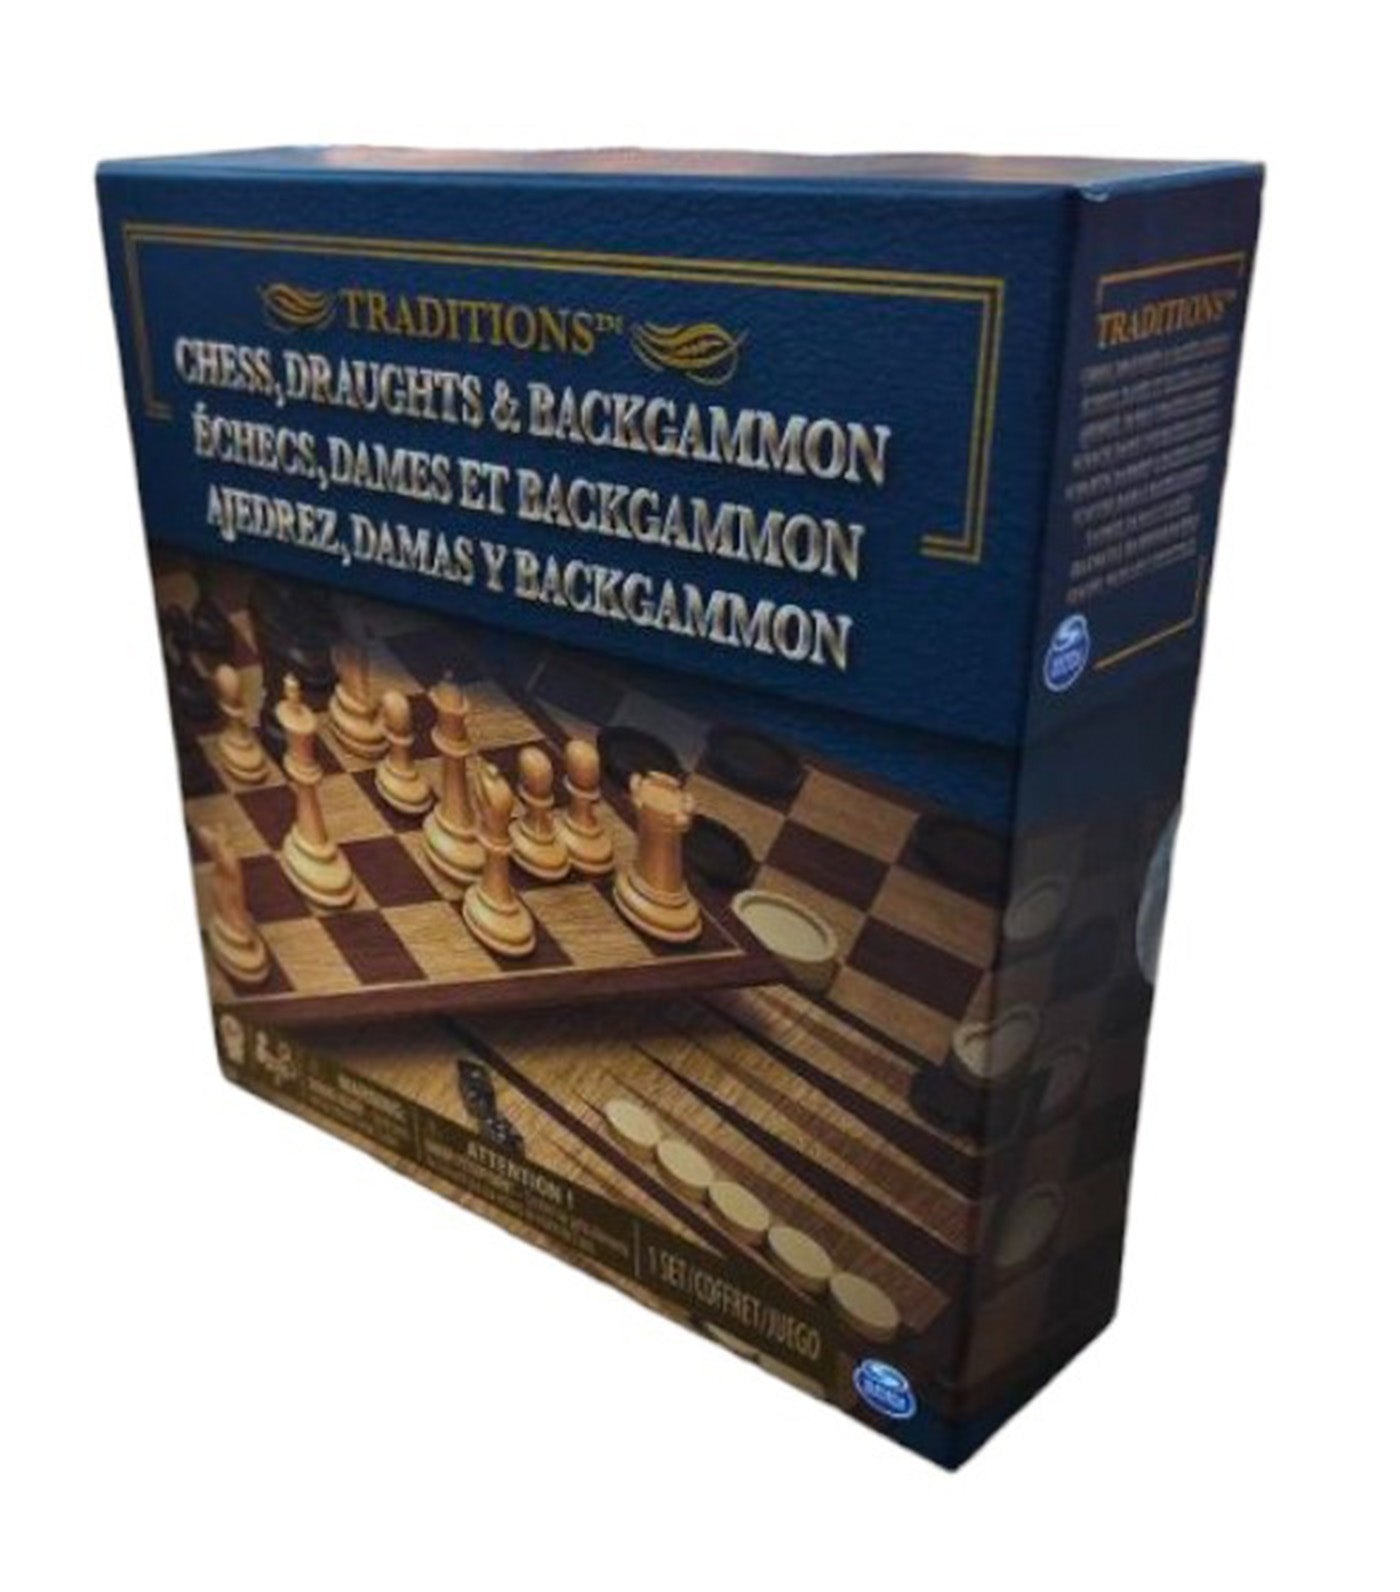 Chess, Draughts, and Backgammon